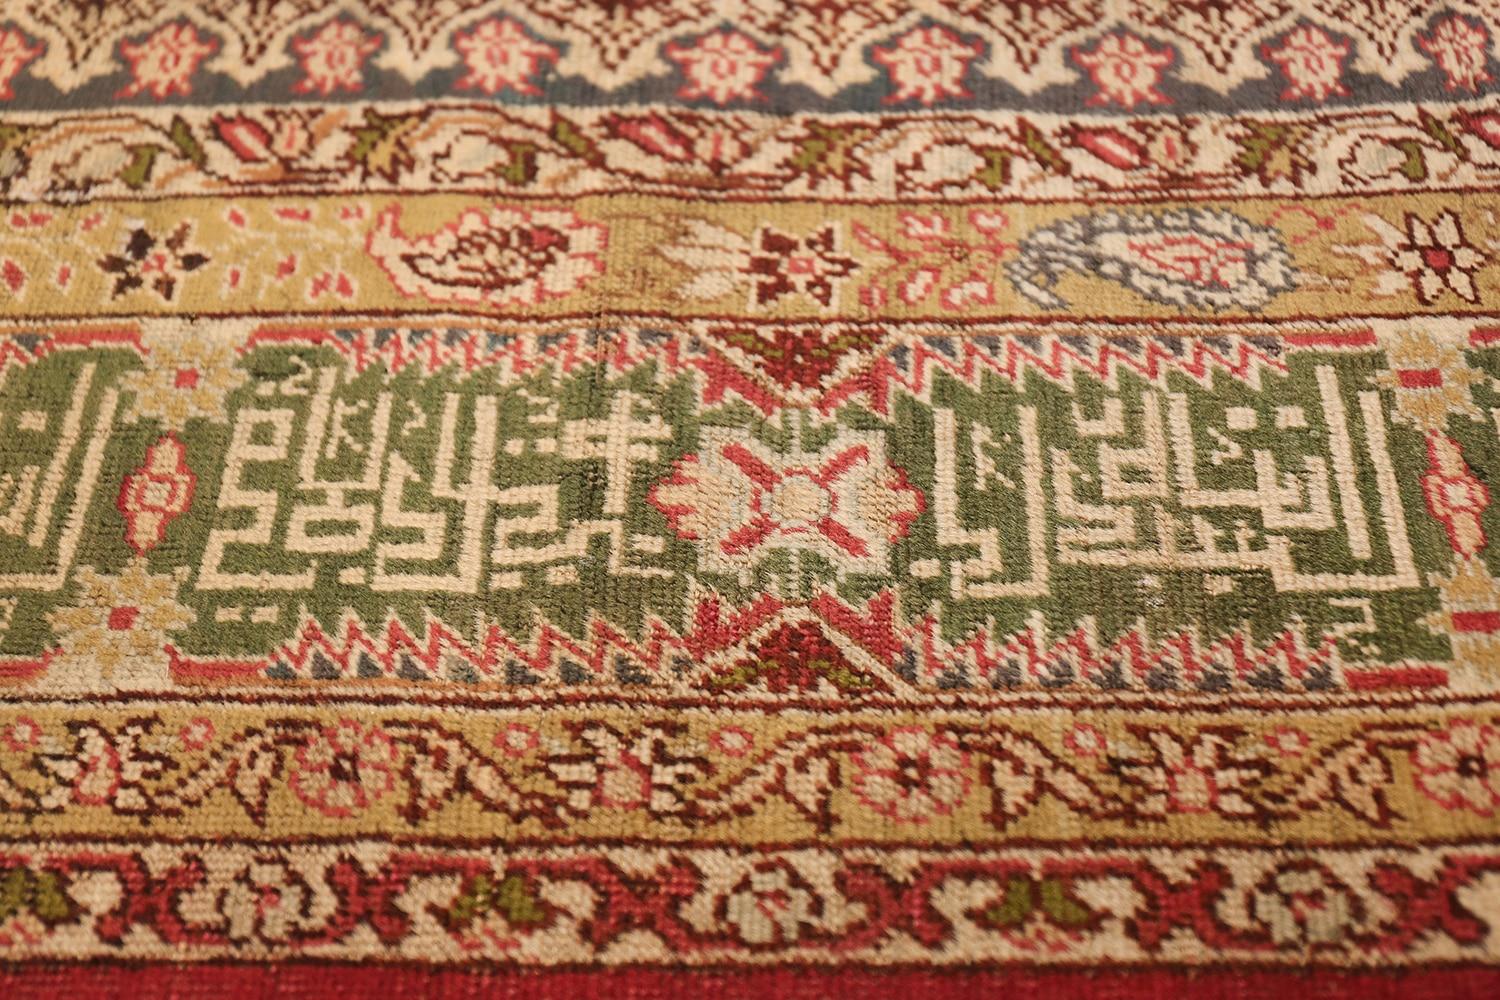 20th Century Antique Turkish Keysari Rug. Size: 6 ft 2 in x 8 ft 8 in (1.88 m x 2.64 m) For Sale